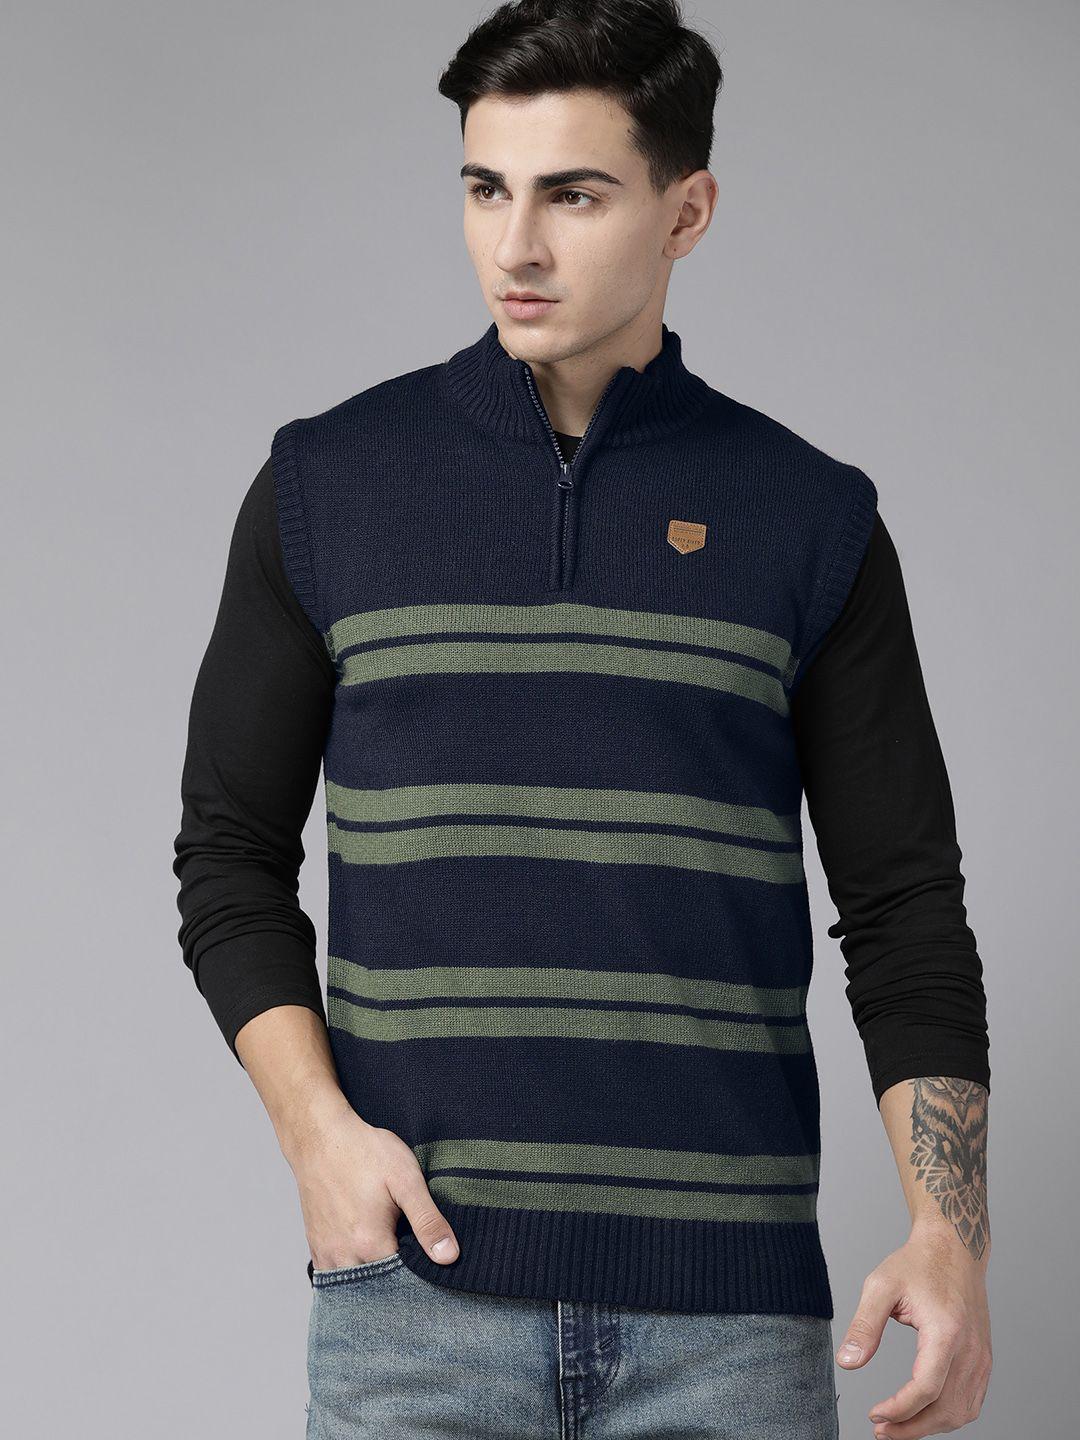 the-roadster-lifestyle-co.-striped-acrylic-sweater-vest